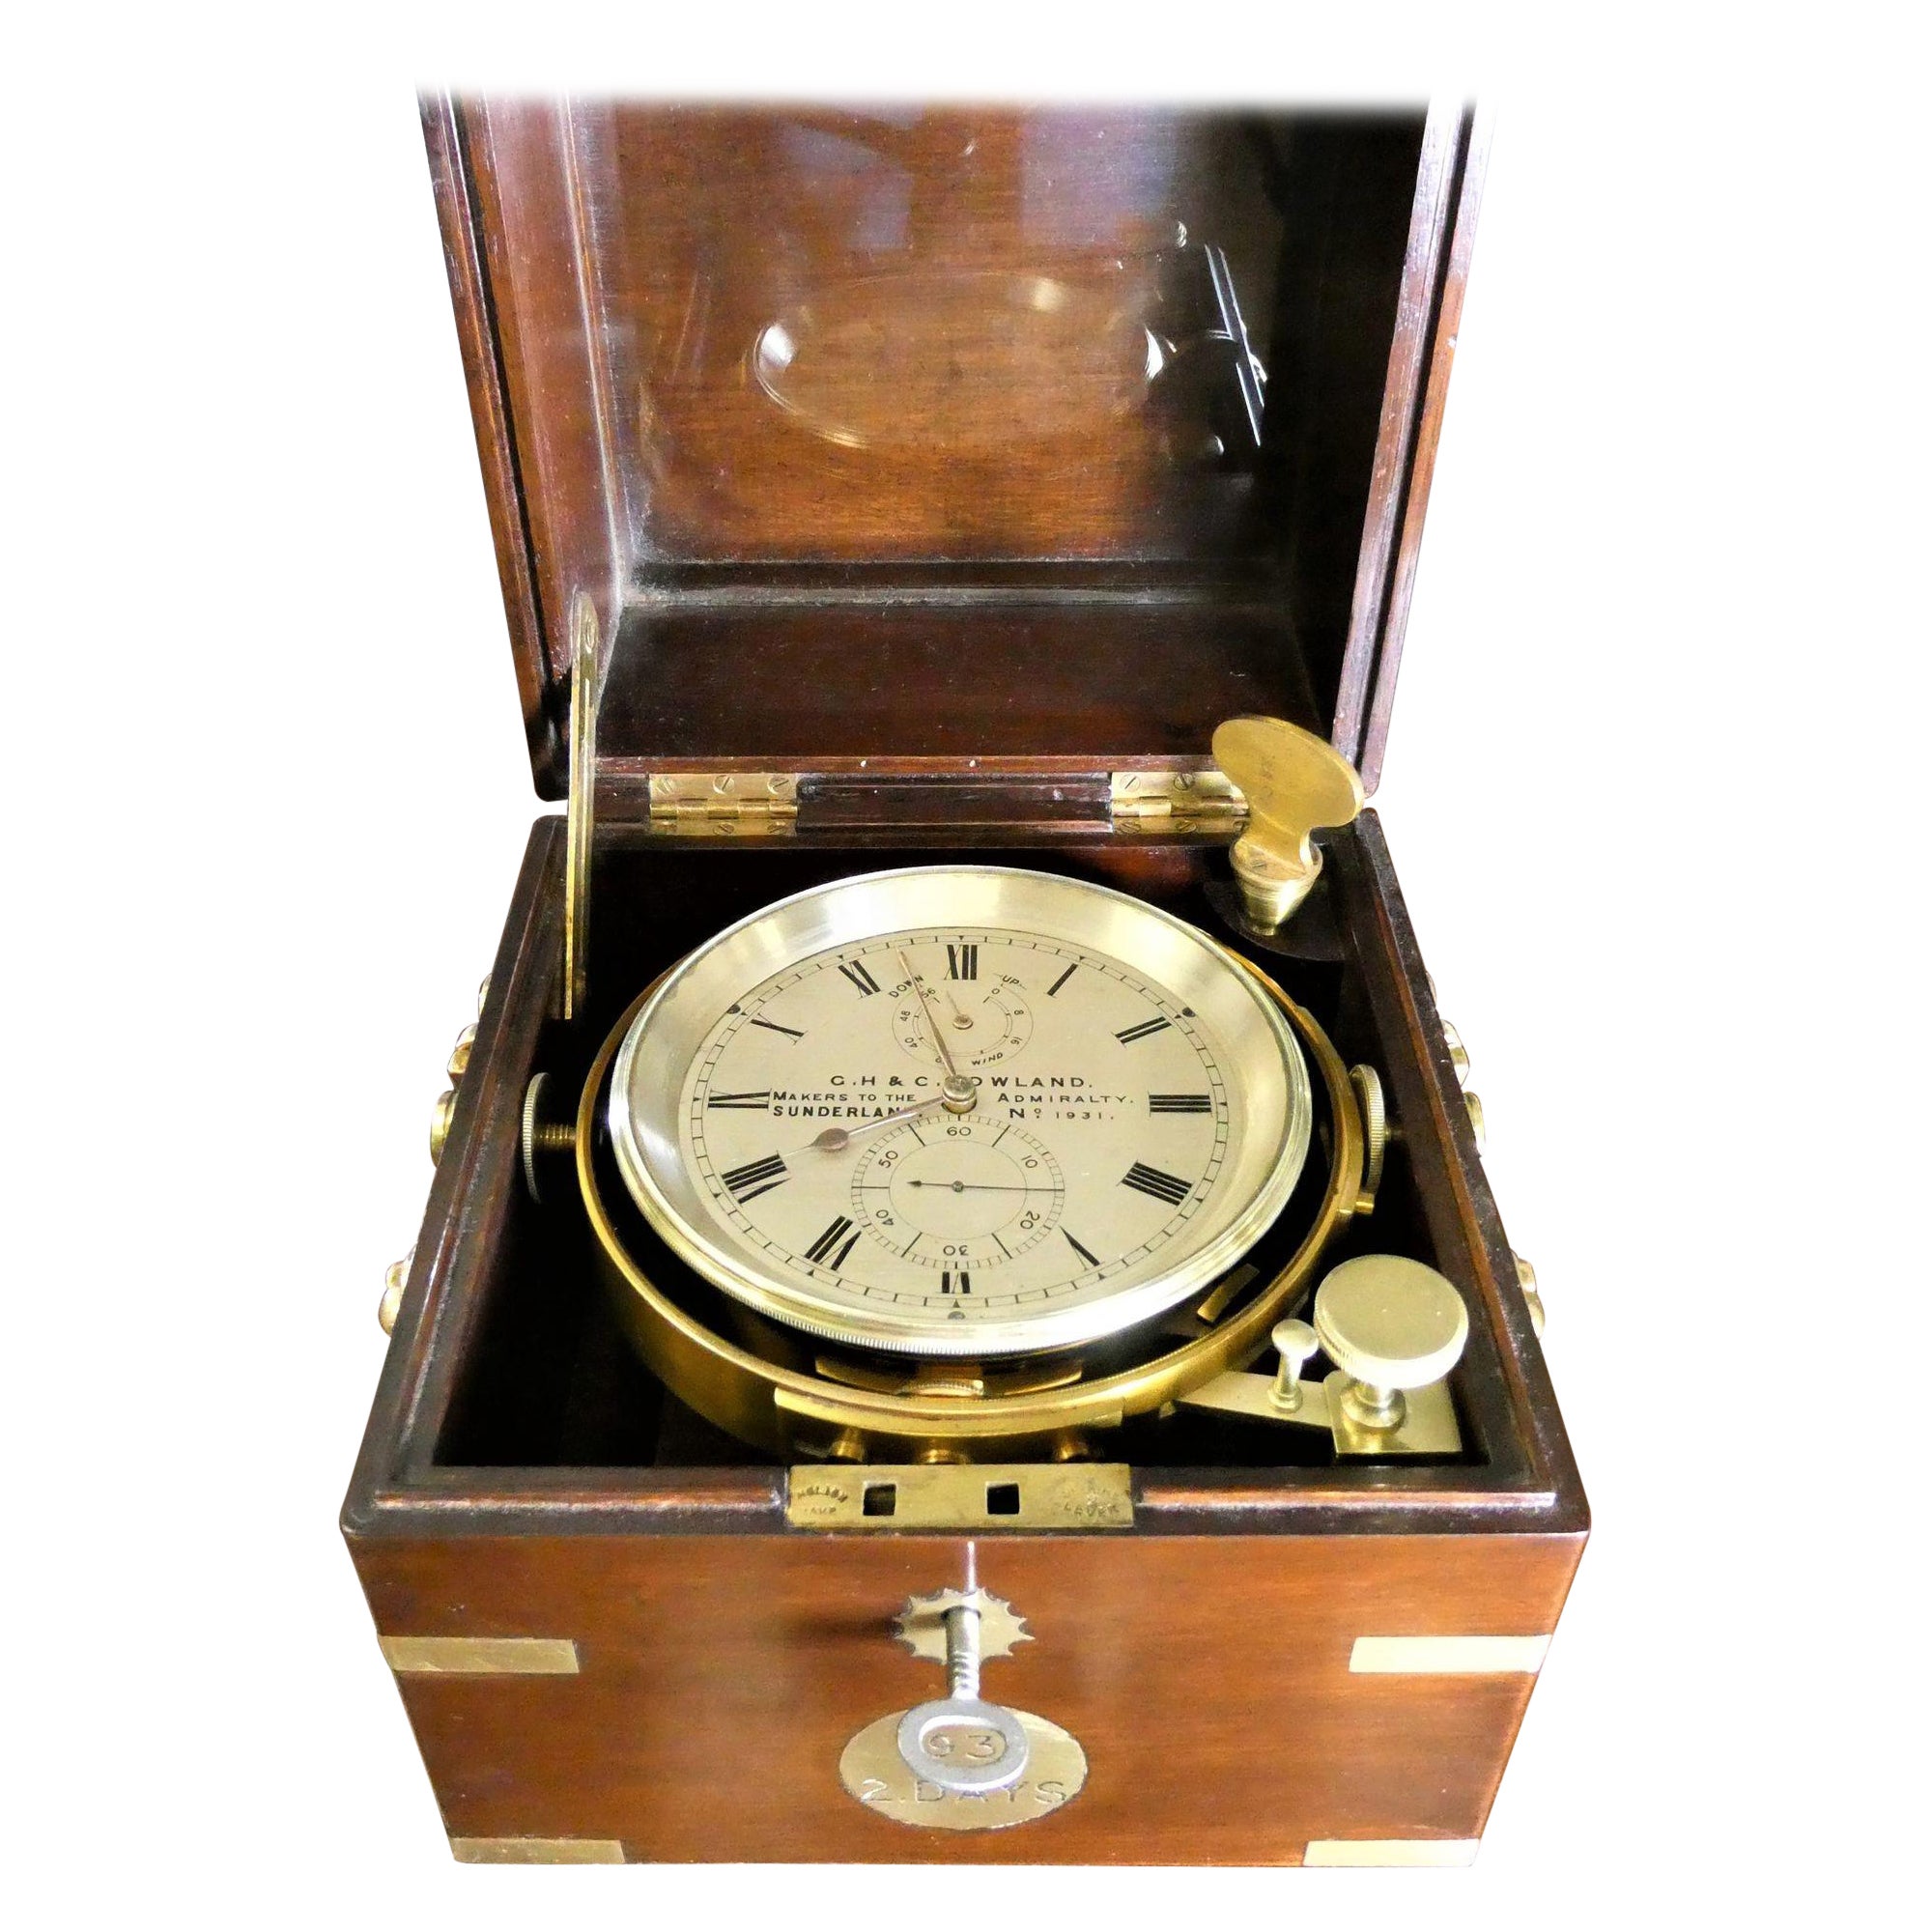 Two Day Marine Chronometer, G.H & C Gowland, Sunderland No.1931 For Sale